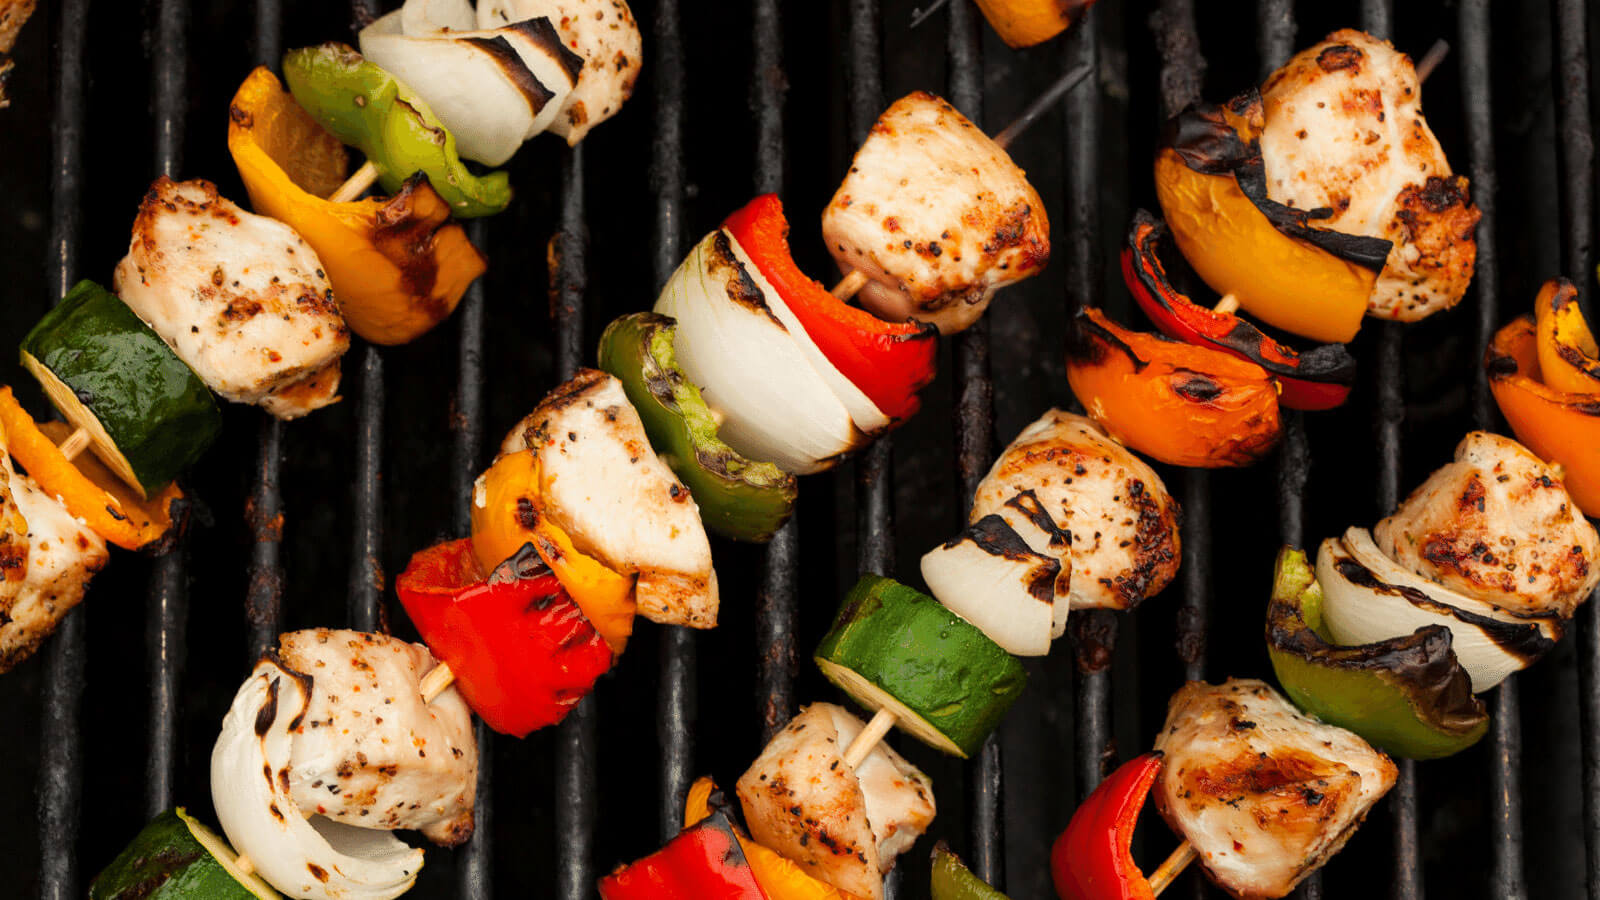 Kebabs on the grill.